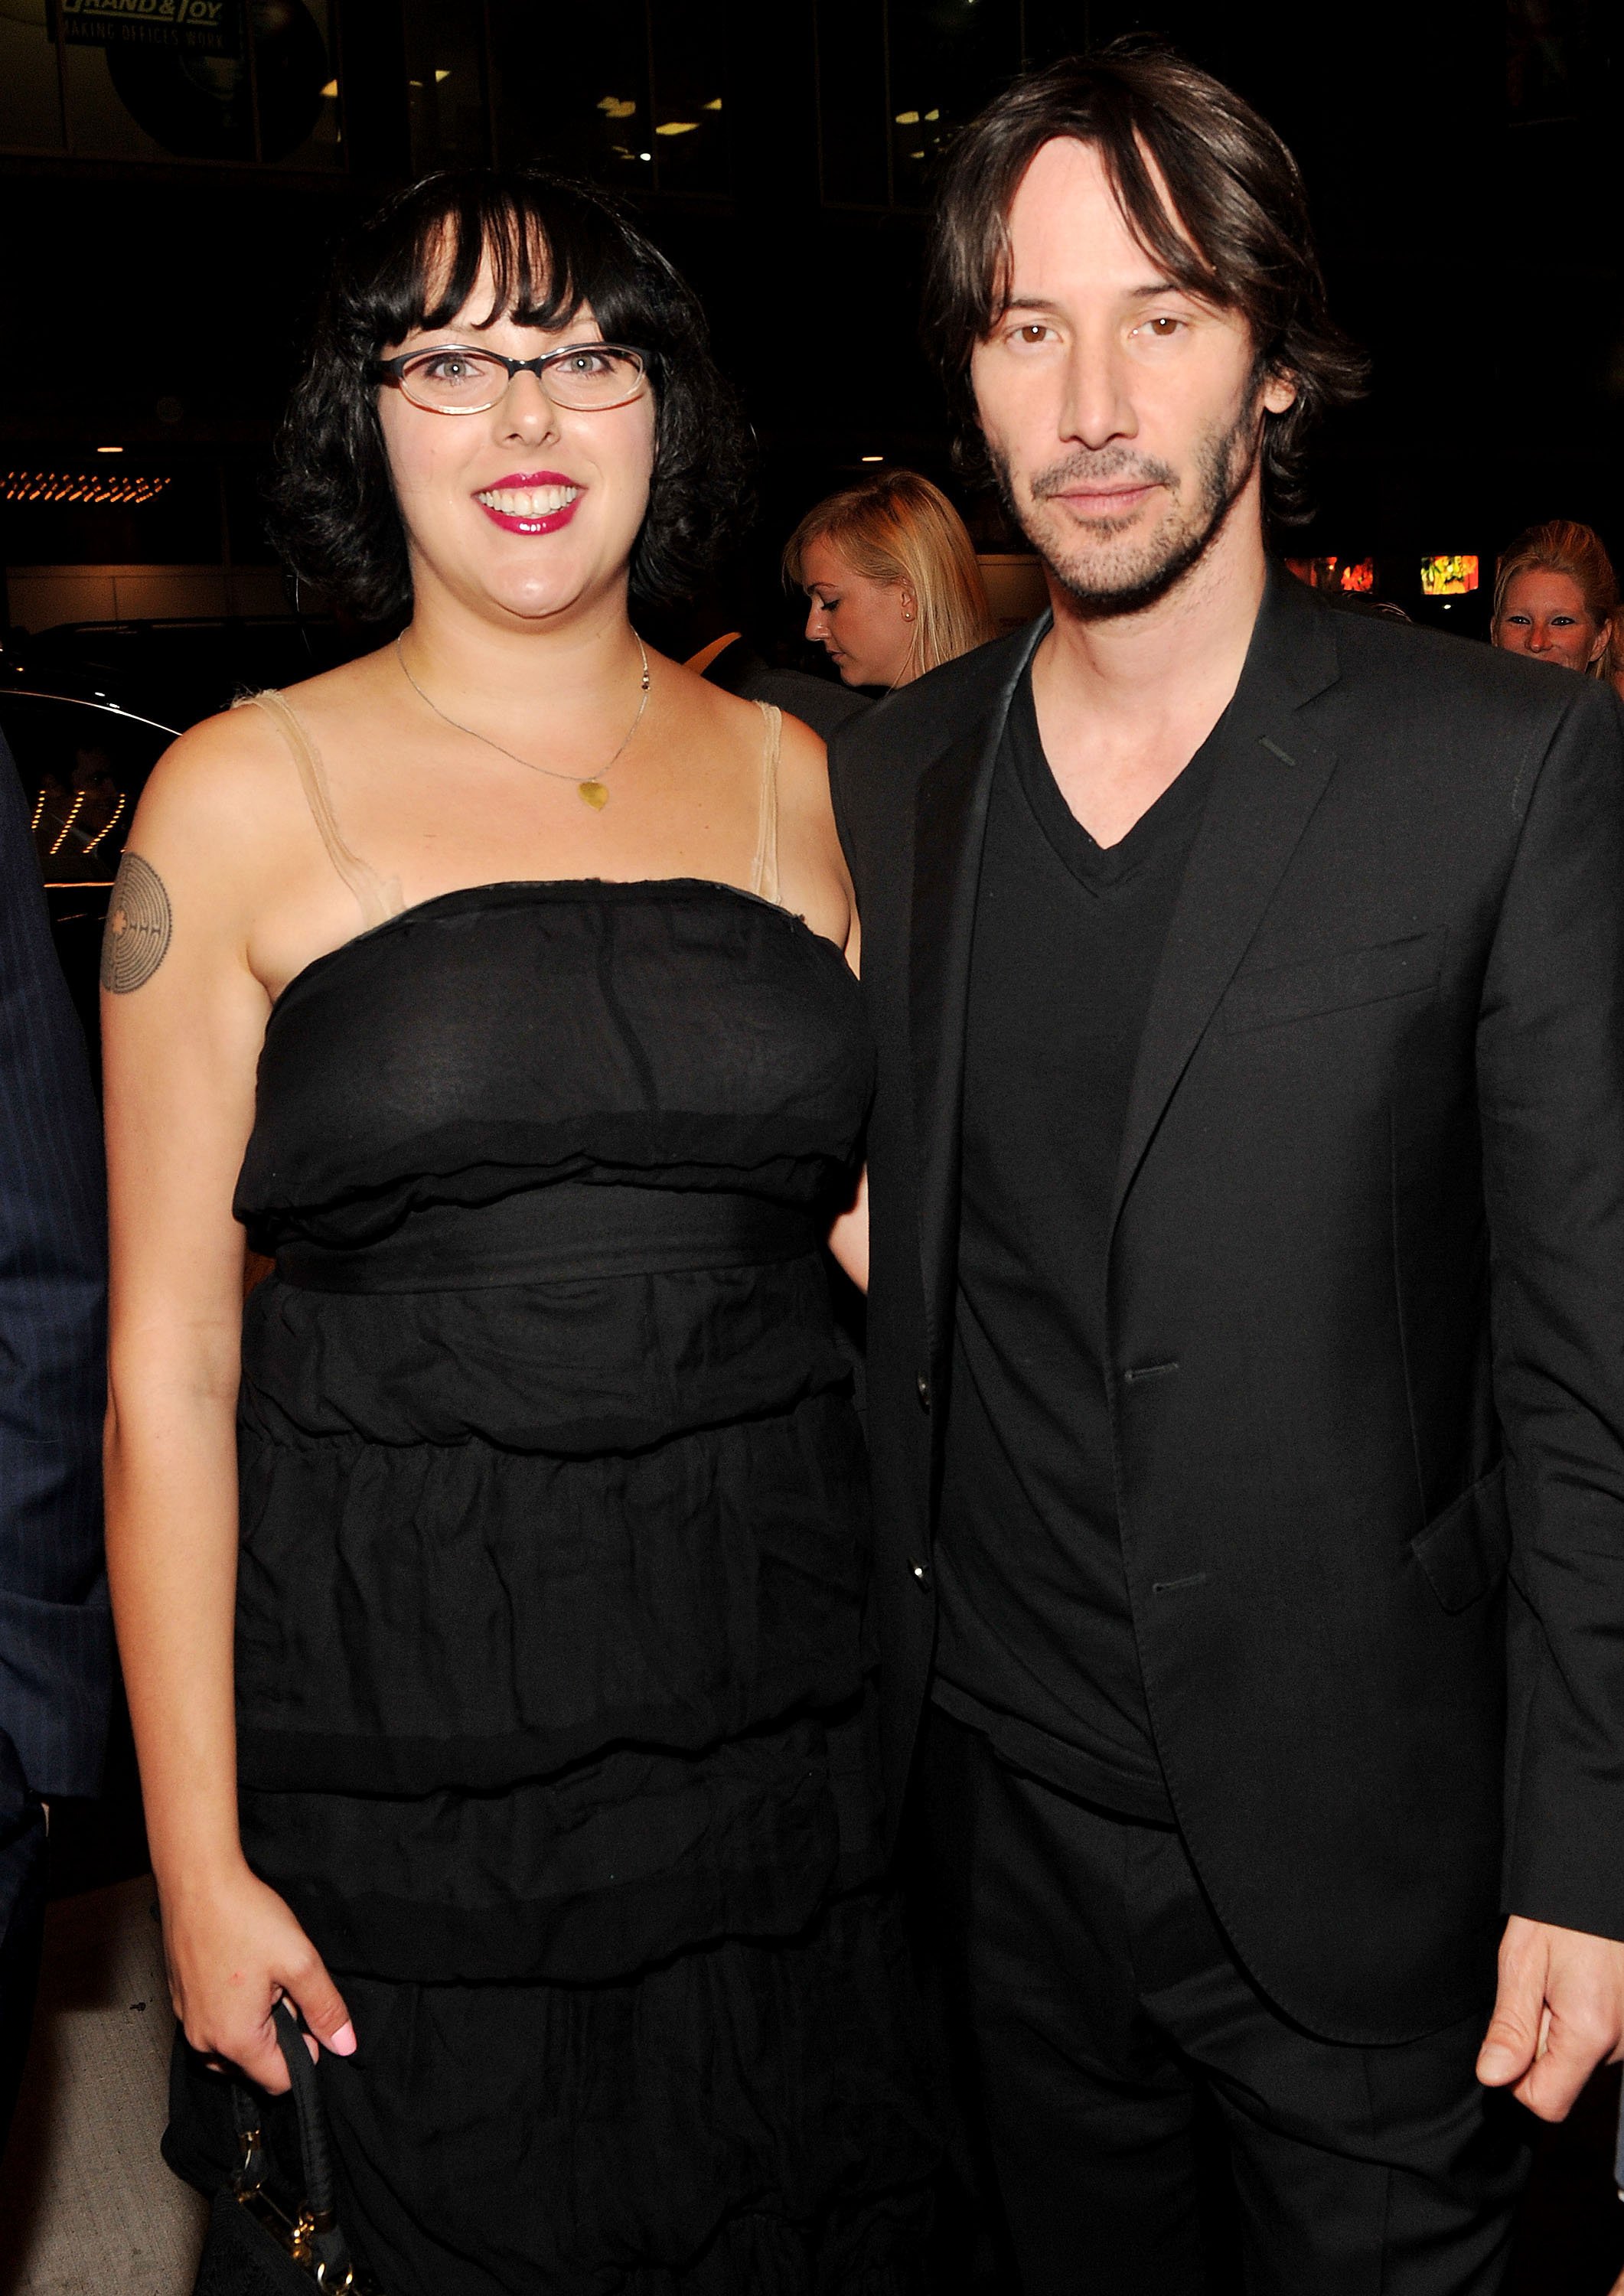 Karina Miller and Keanu Reeves at the "Henry's Crime" during the 35th Toronto International Film Festival on September 14, 2010, in Toronto, Canada. | Source: Getty Images